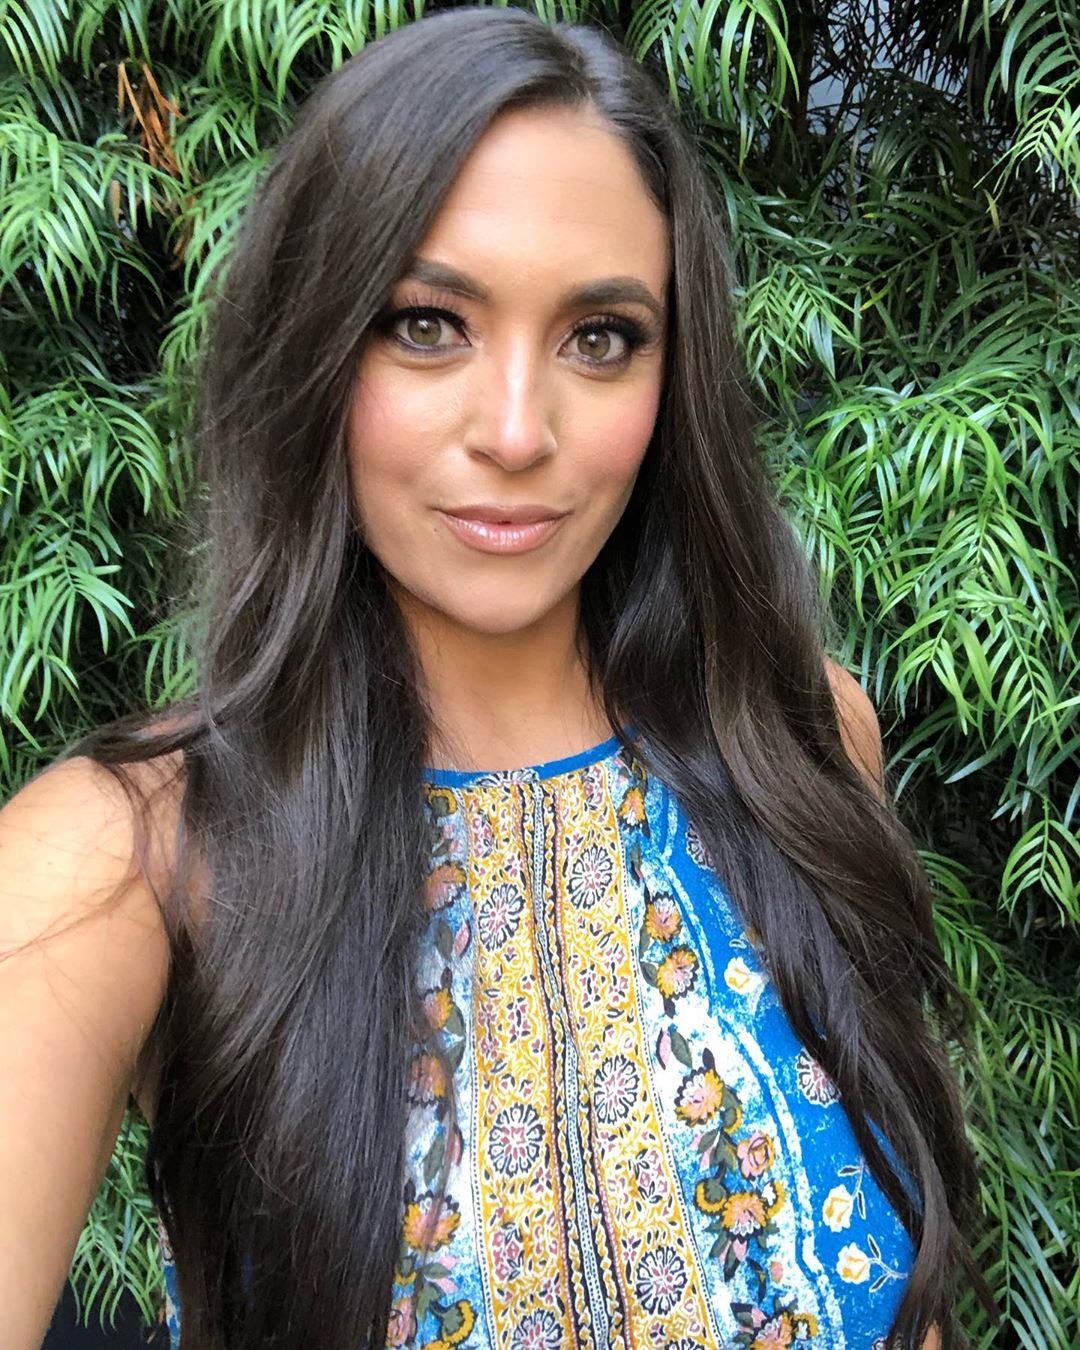 Sammi Giancola's Transformation Her Life Since Leaving 'Jersey Shore'